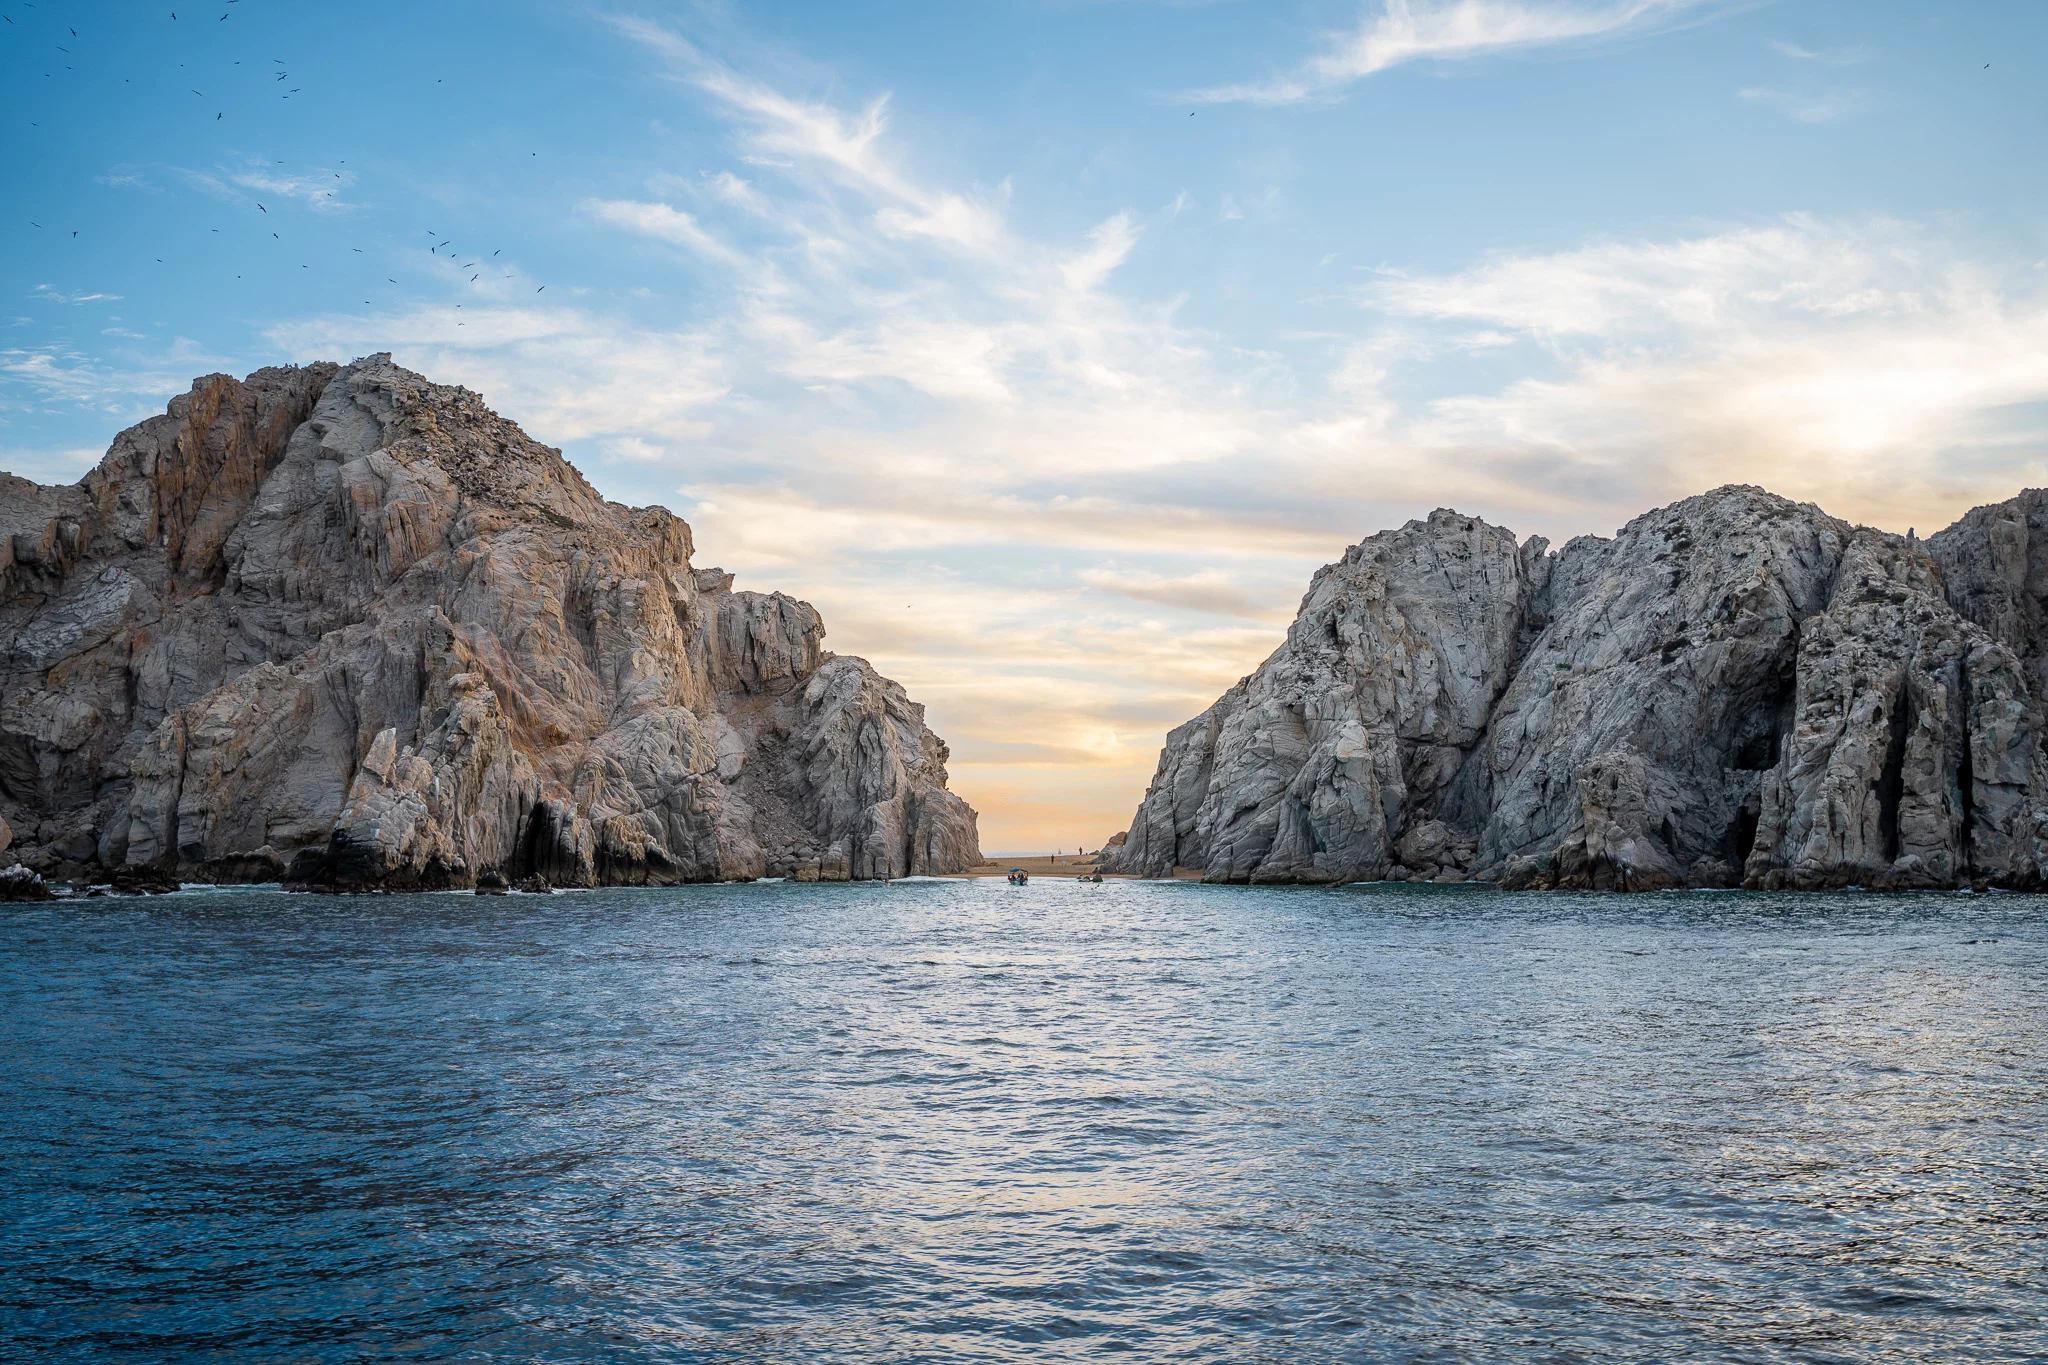 Playa del Amor Lovers Beach Cabo San Lucas Mexico Sunset boat tour